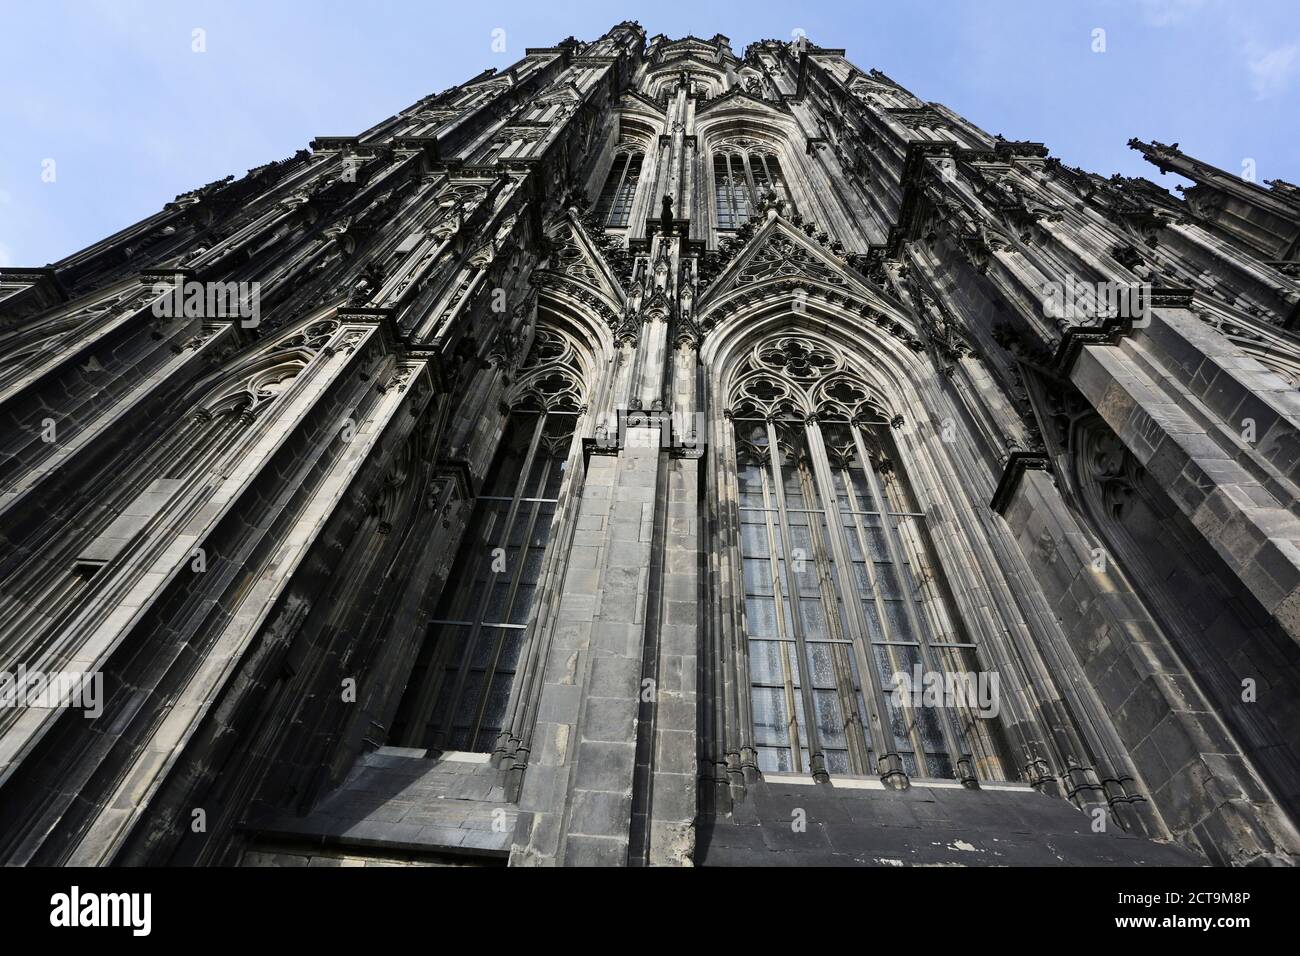 Germany, North Rine-Westphalia, Cologne, worm's-eye view of part of facade of Cologne Cathedral Stock Photo